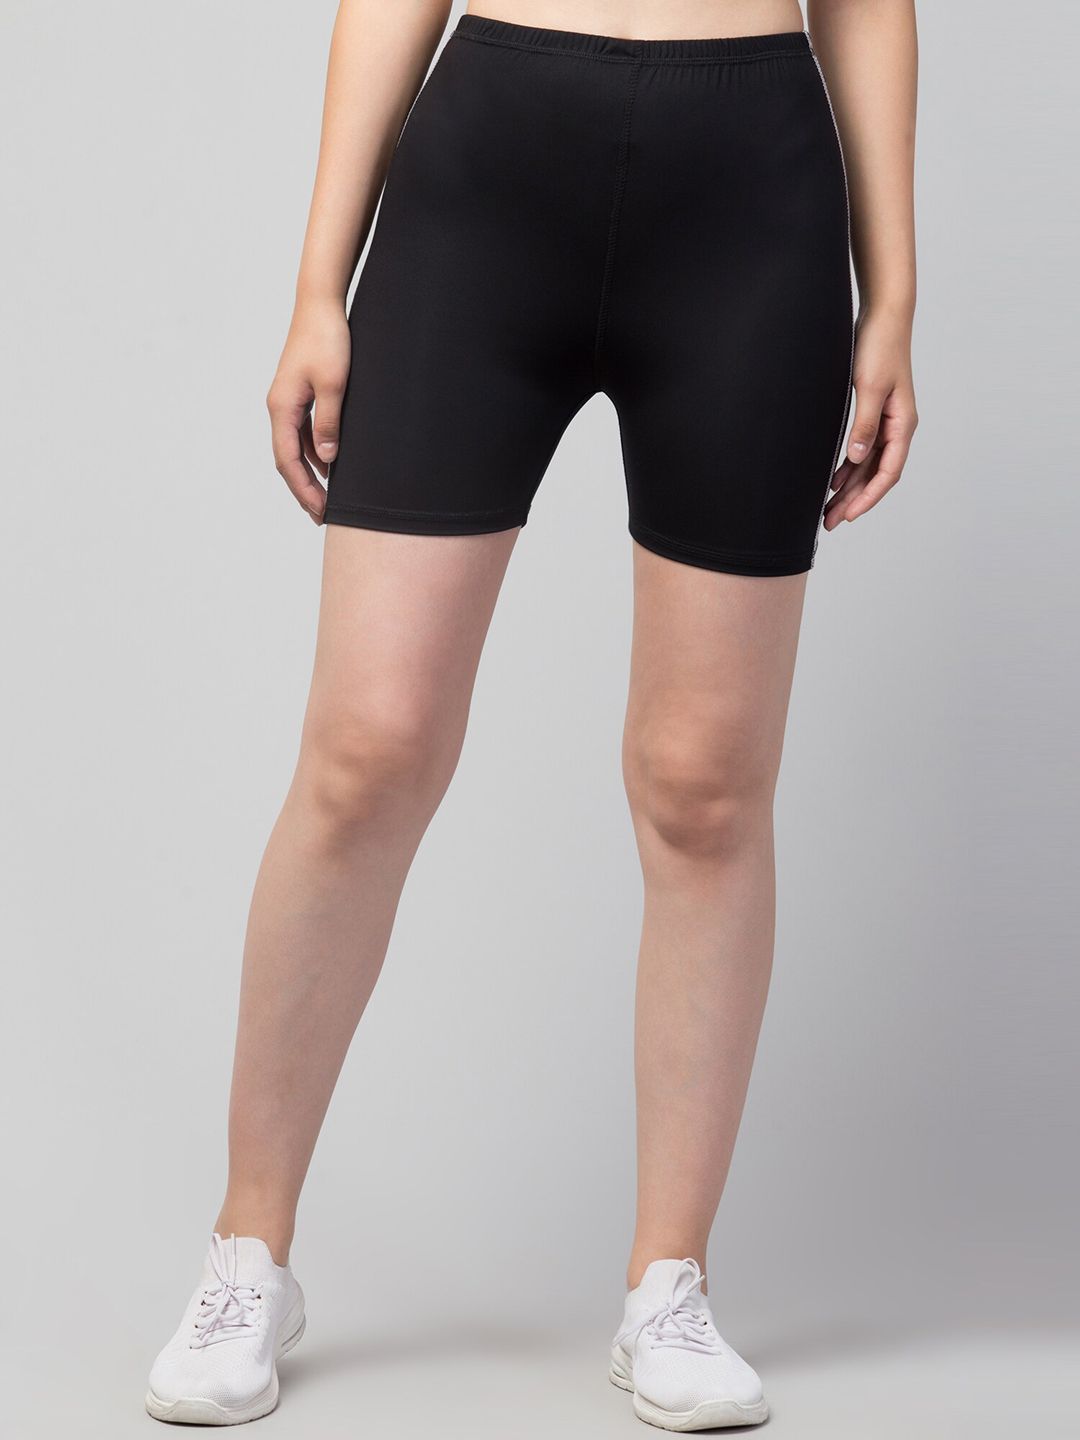 Apraa & Parma Women Black Skinny Fit Yoga e-Dry Technology Shorts Price in India